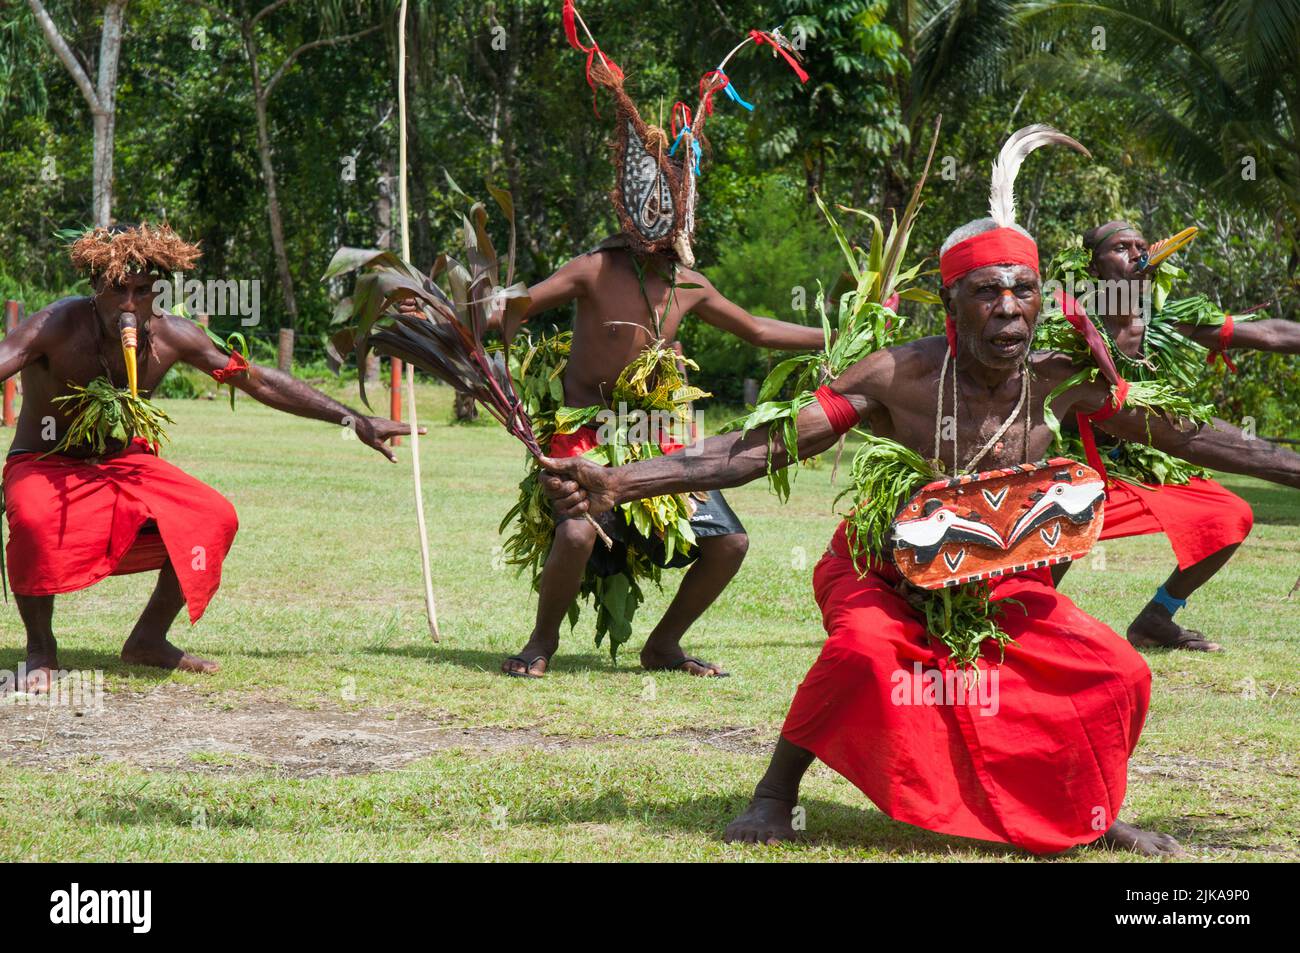 Malagan tribal welcome dance performed in New Ireland, Papua New Guinea Stock Photo